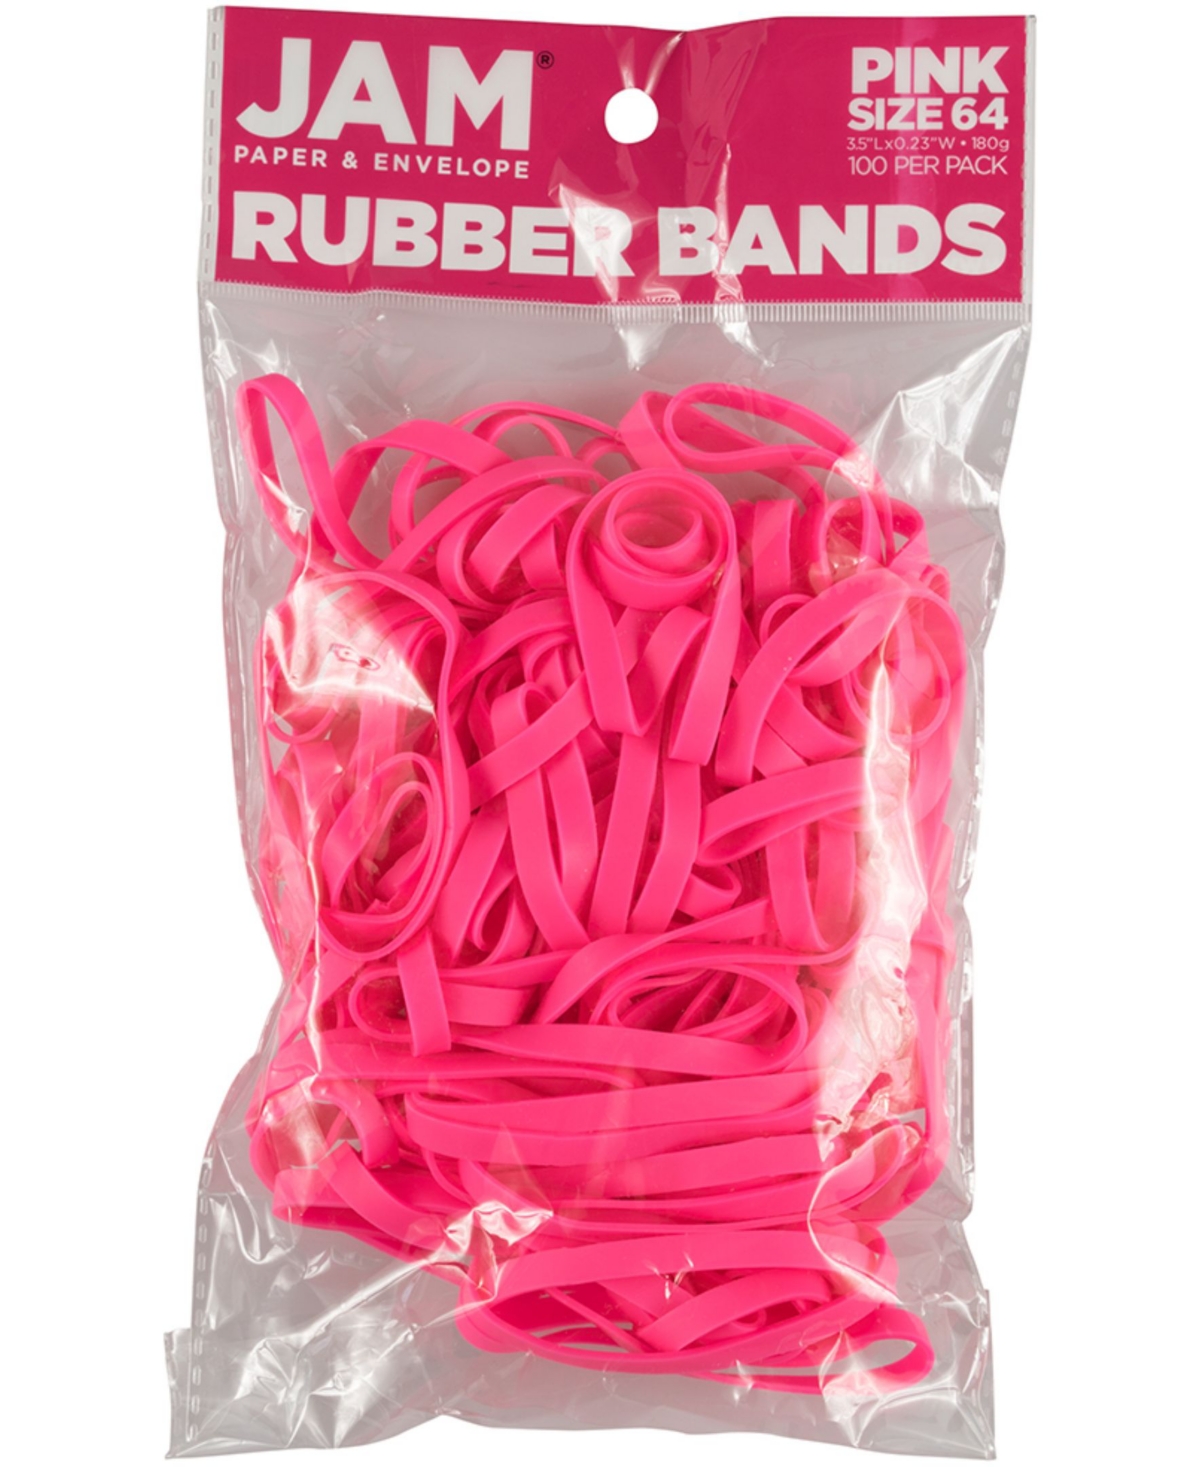 Jam Paper Durable Rubber Bands In Pink